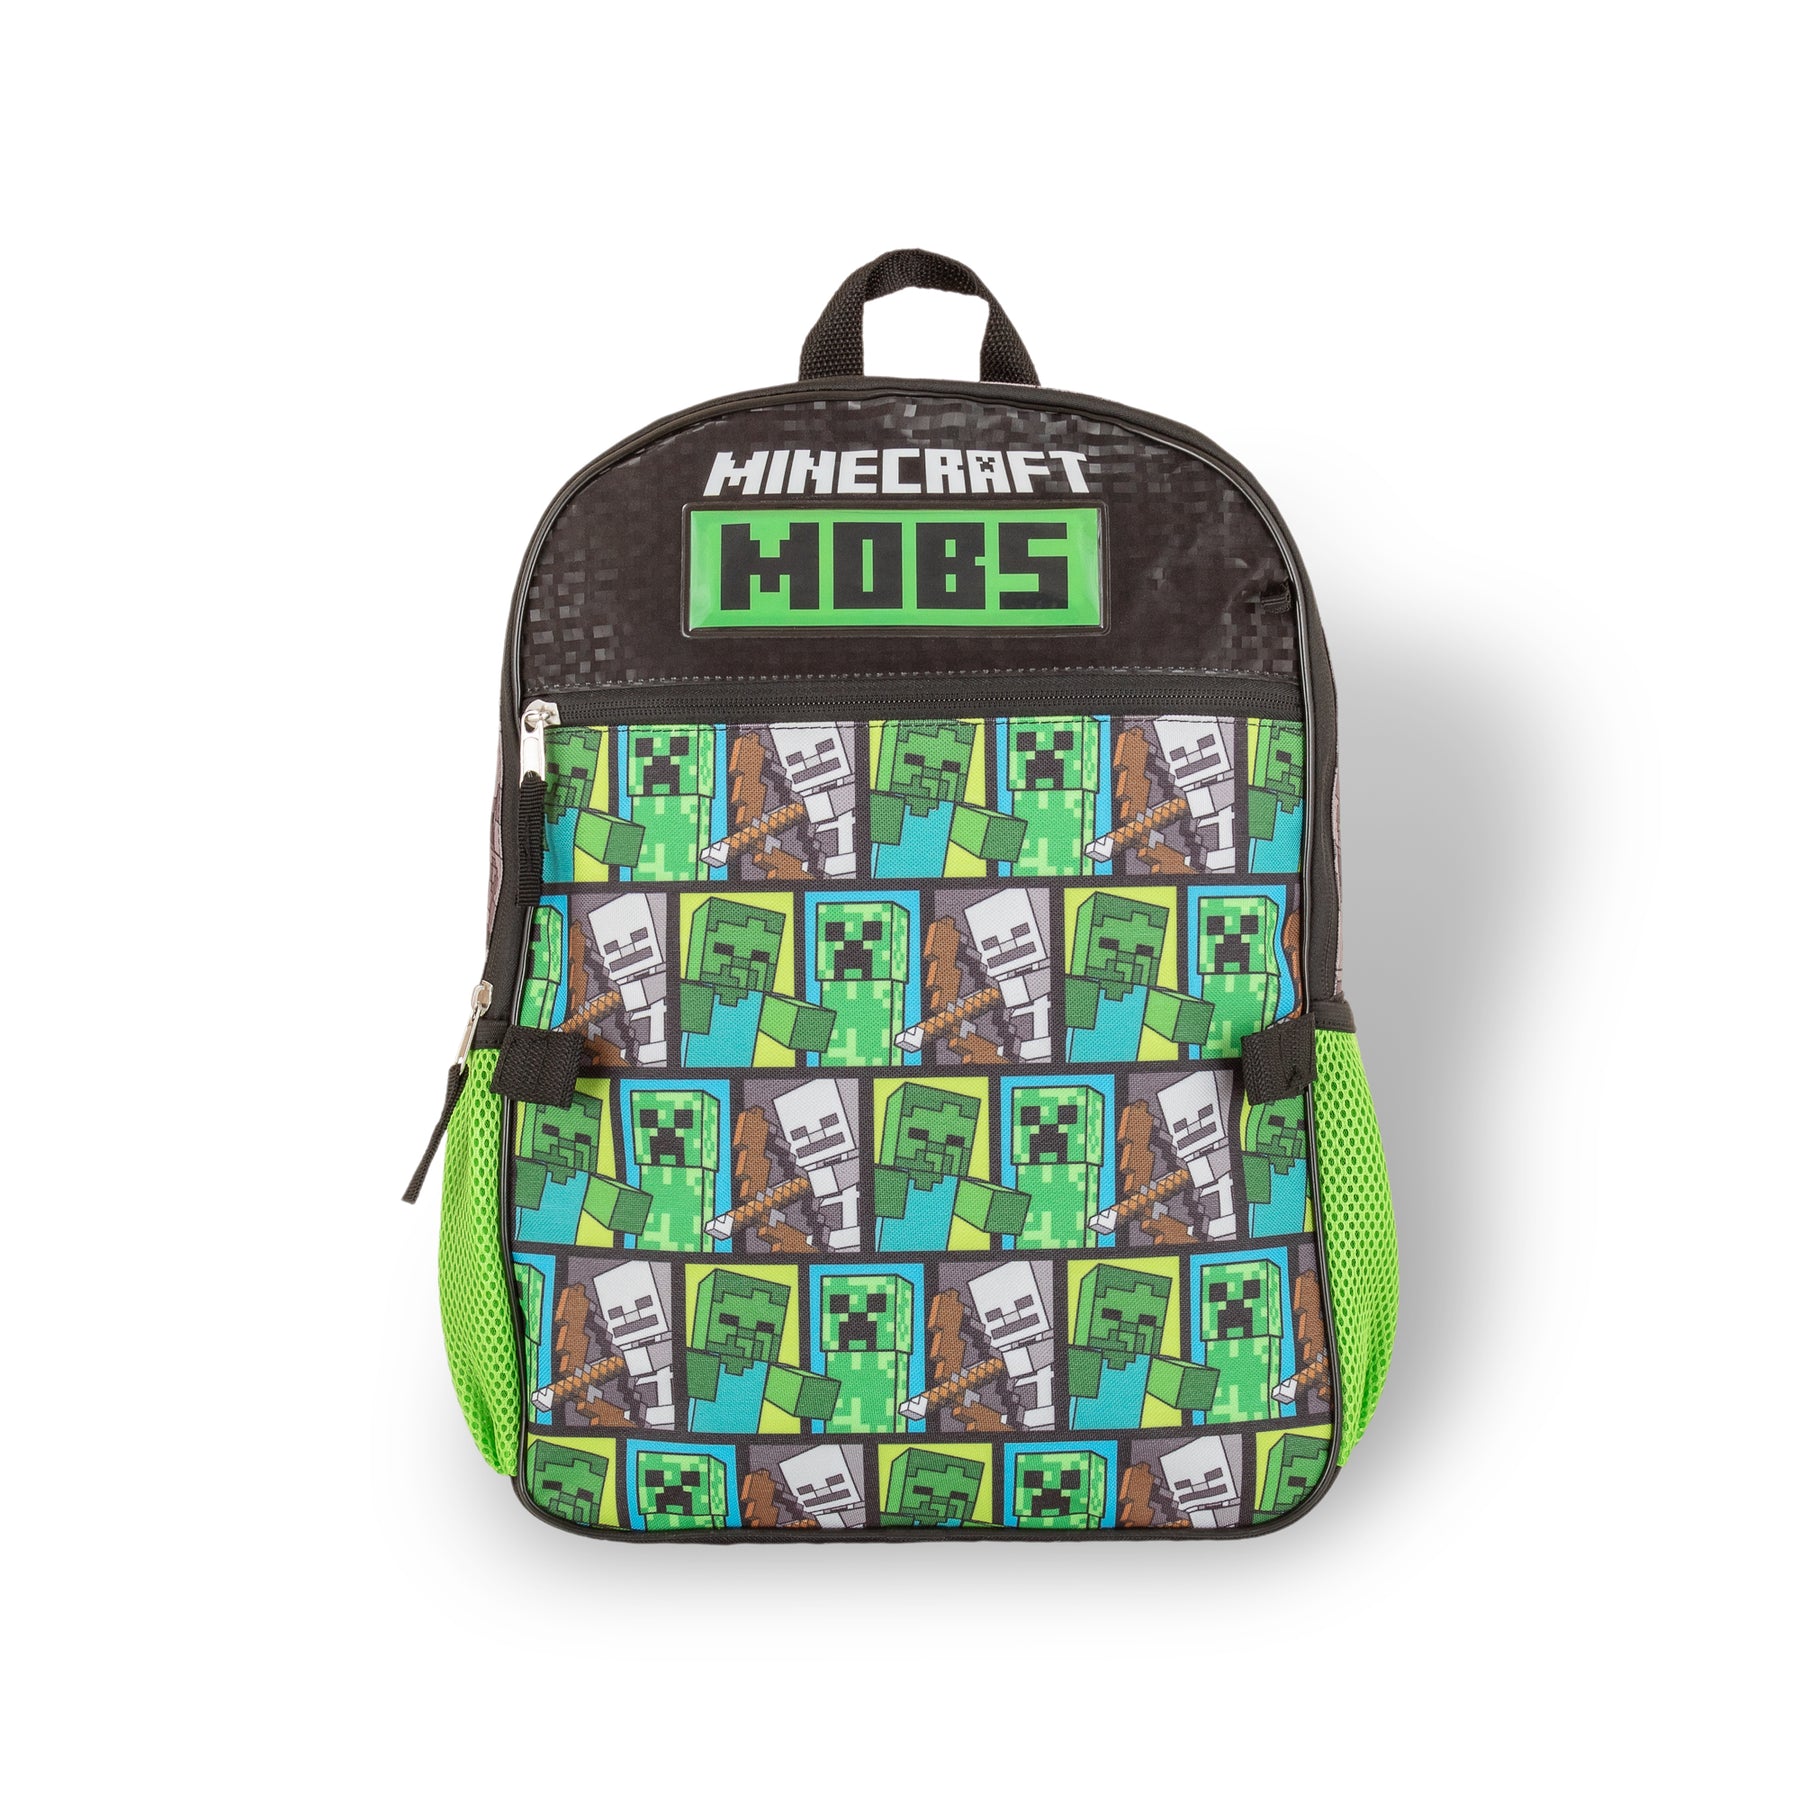 Minecraft Creeper 17 Inch Backpack w/ Lunch Bag | Free Shipping